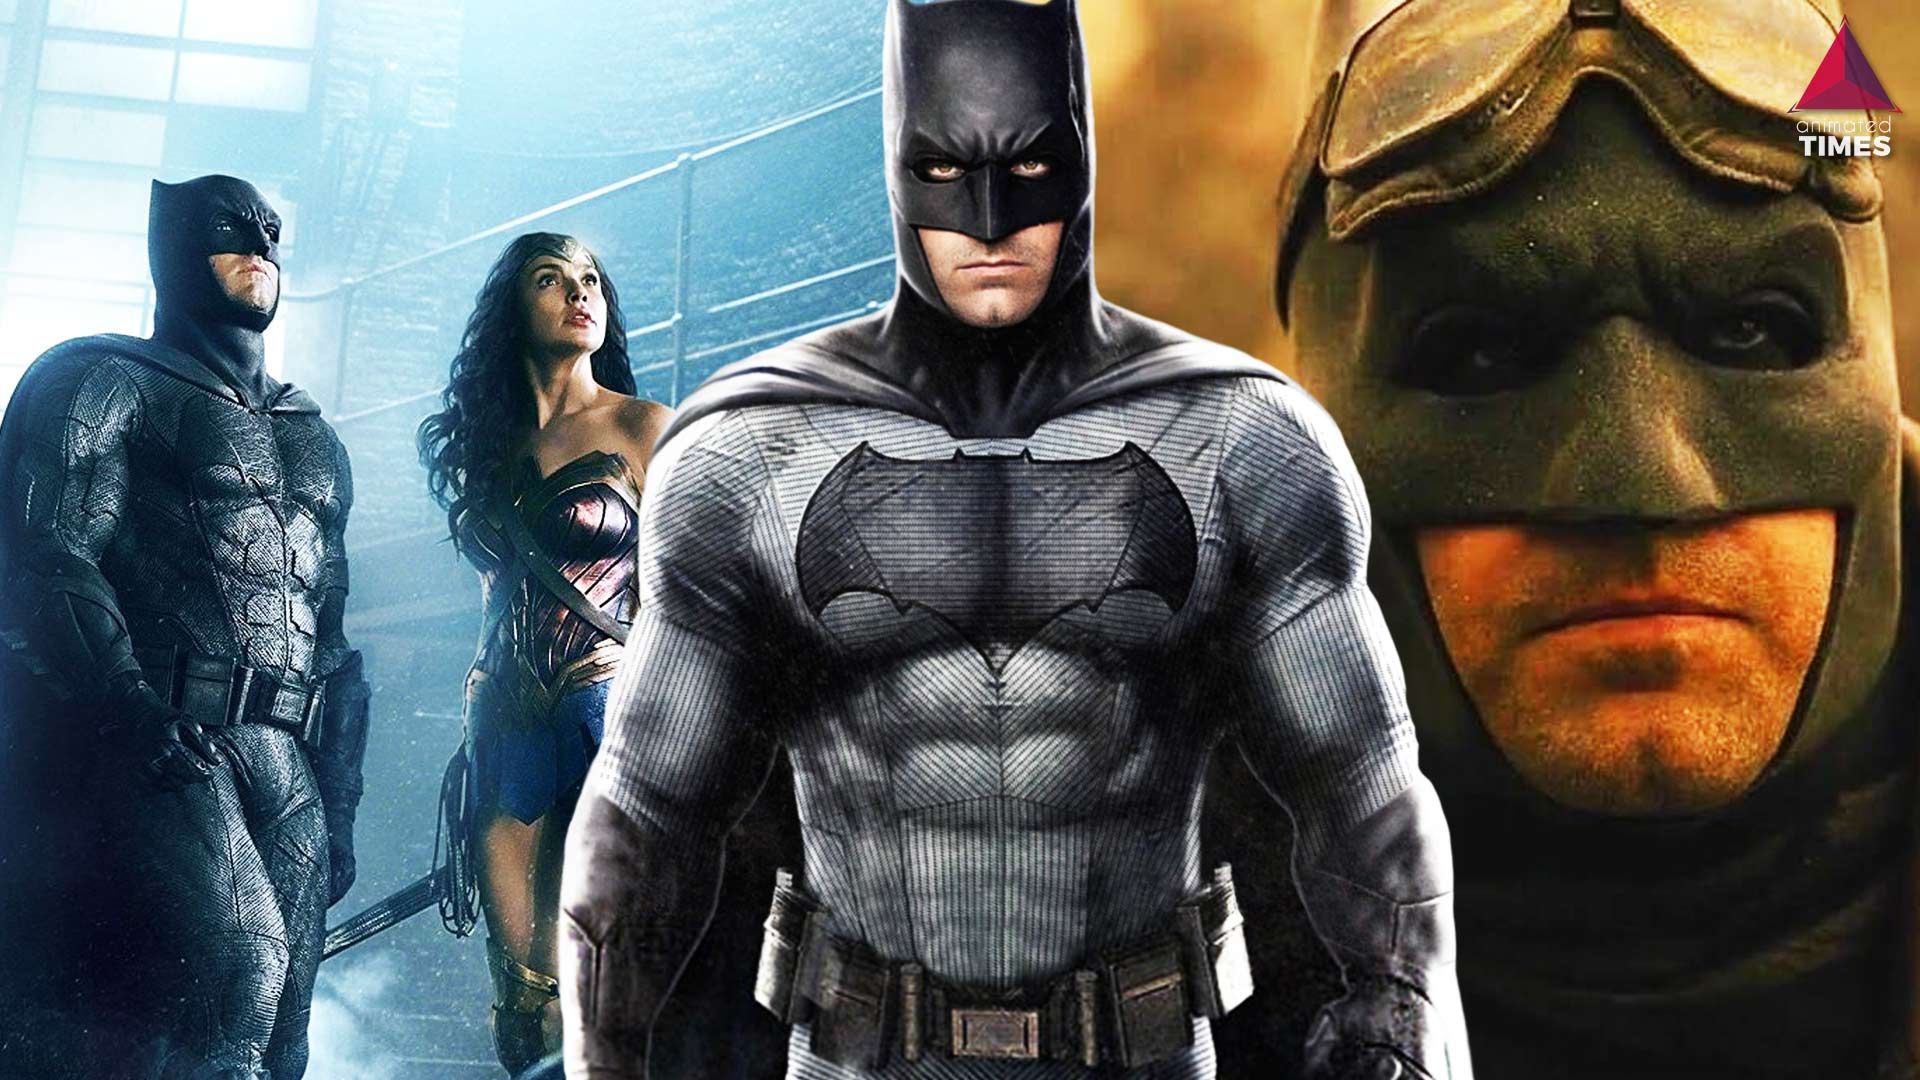 Zack Snyder’s Justice League Is Powering Up Batman, And We Are All For It!